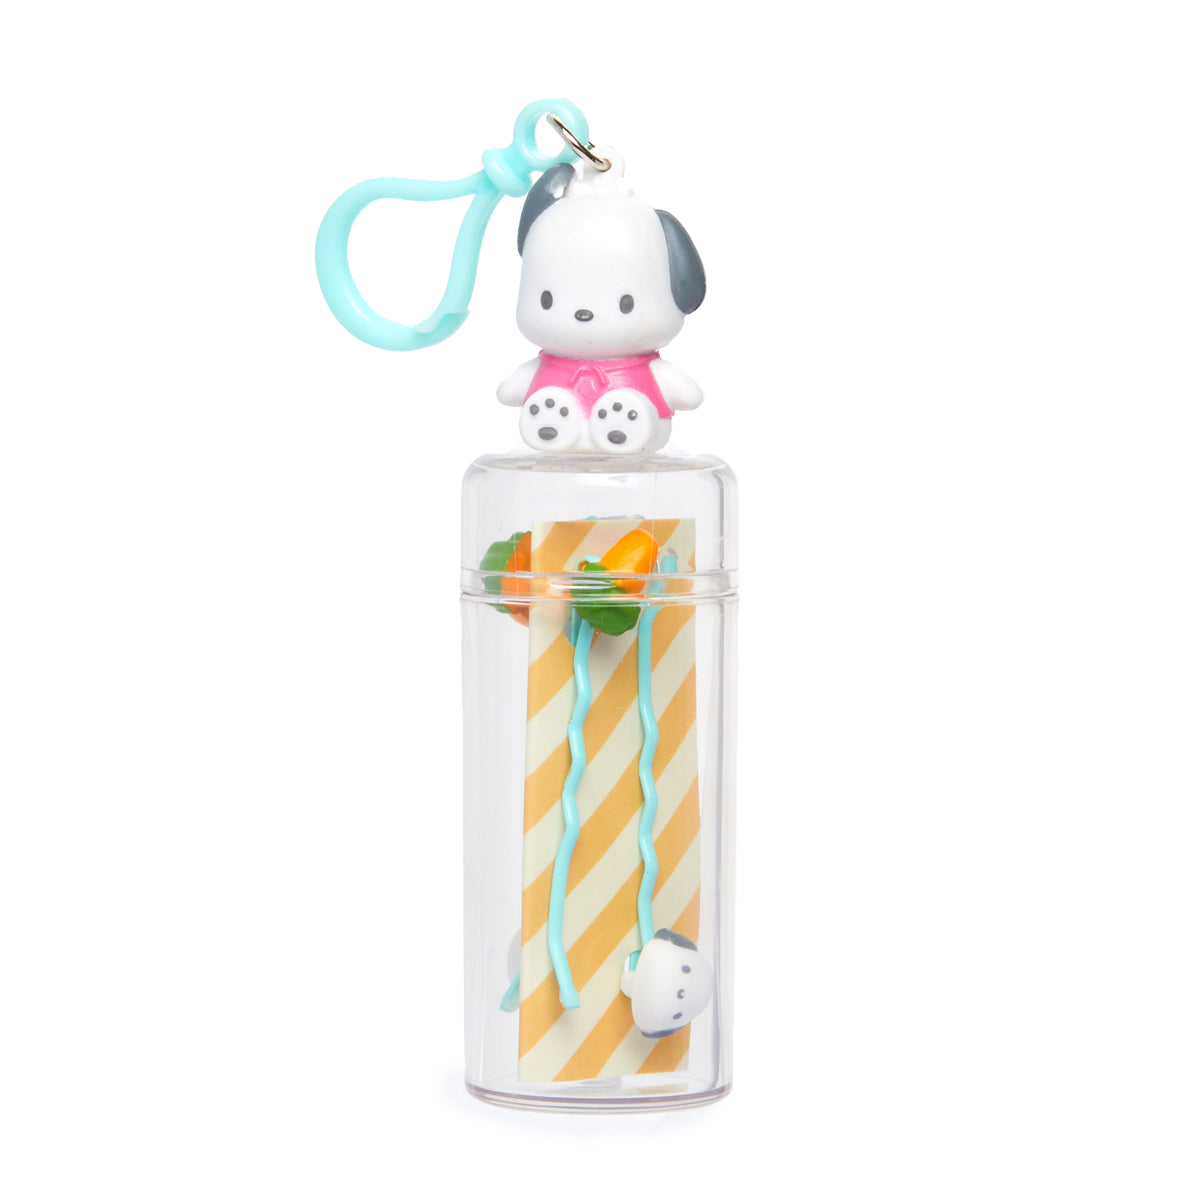 Pochacco Bobby Pins with Carrying Case Accessory Japan Original   